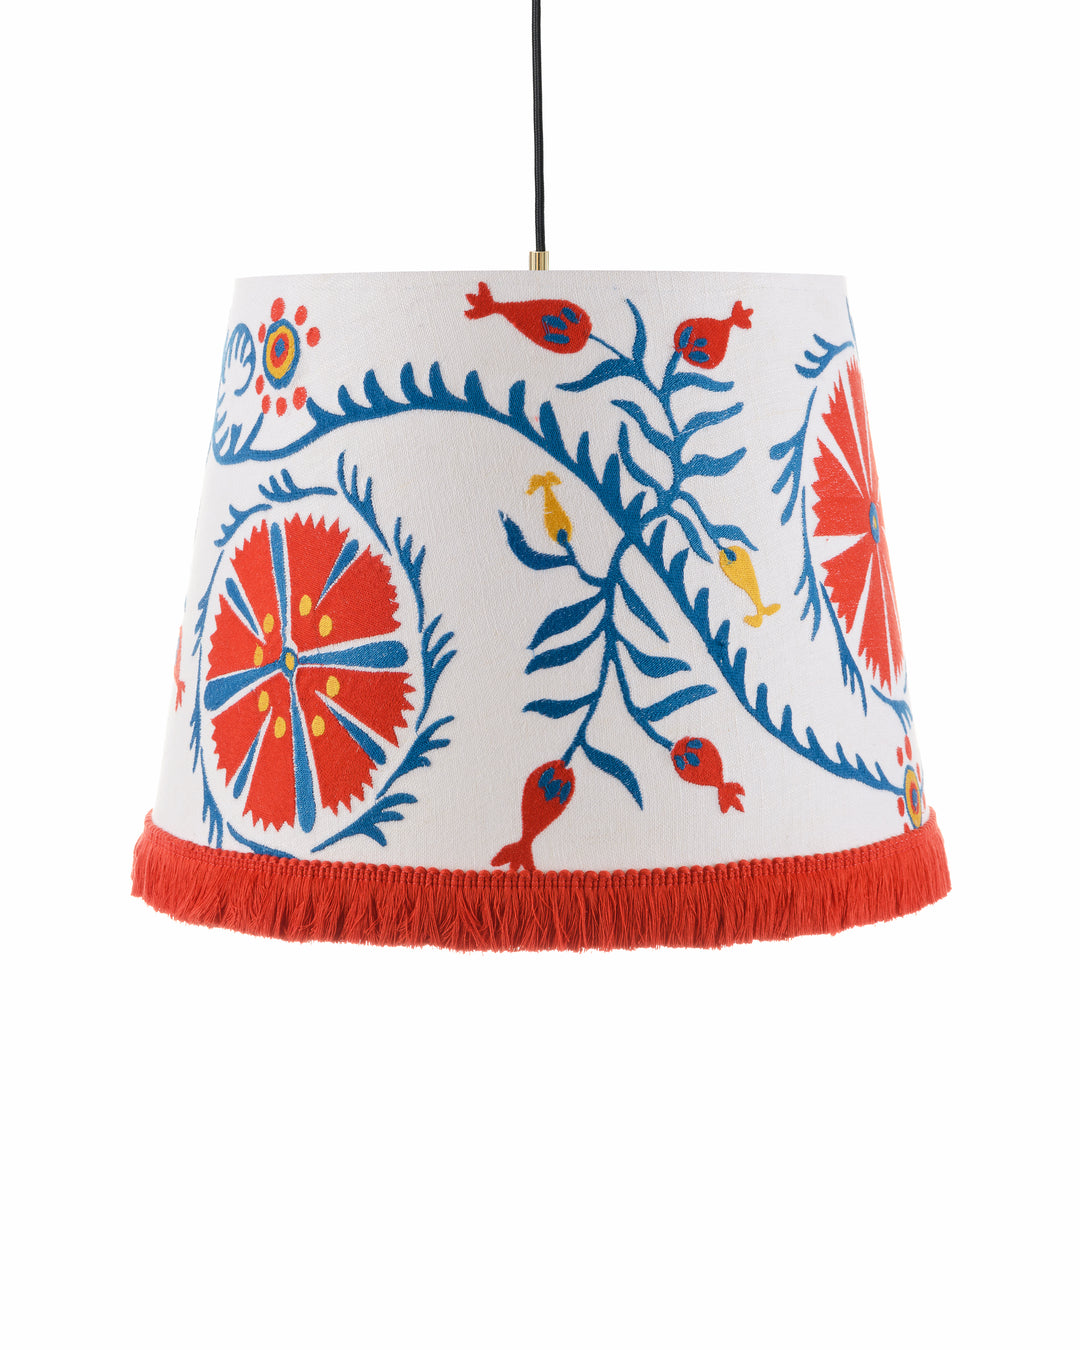 viragos-embroidered-cone-pendant-light-ceiling-lamp-blue-red-yellow-red-fringe-MINDTHEGAP-the-design-yard